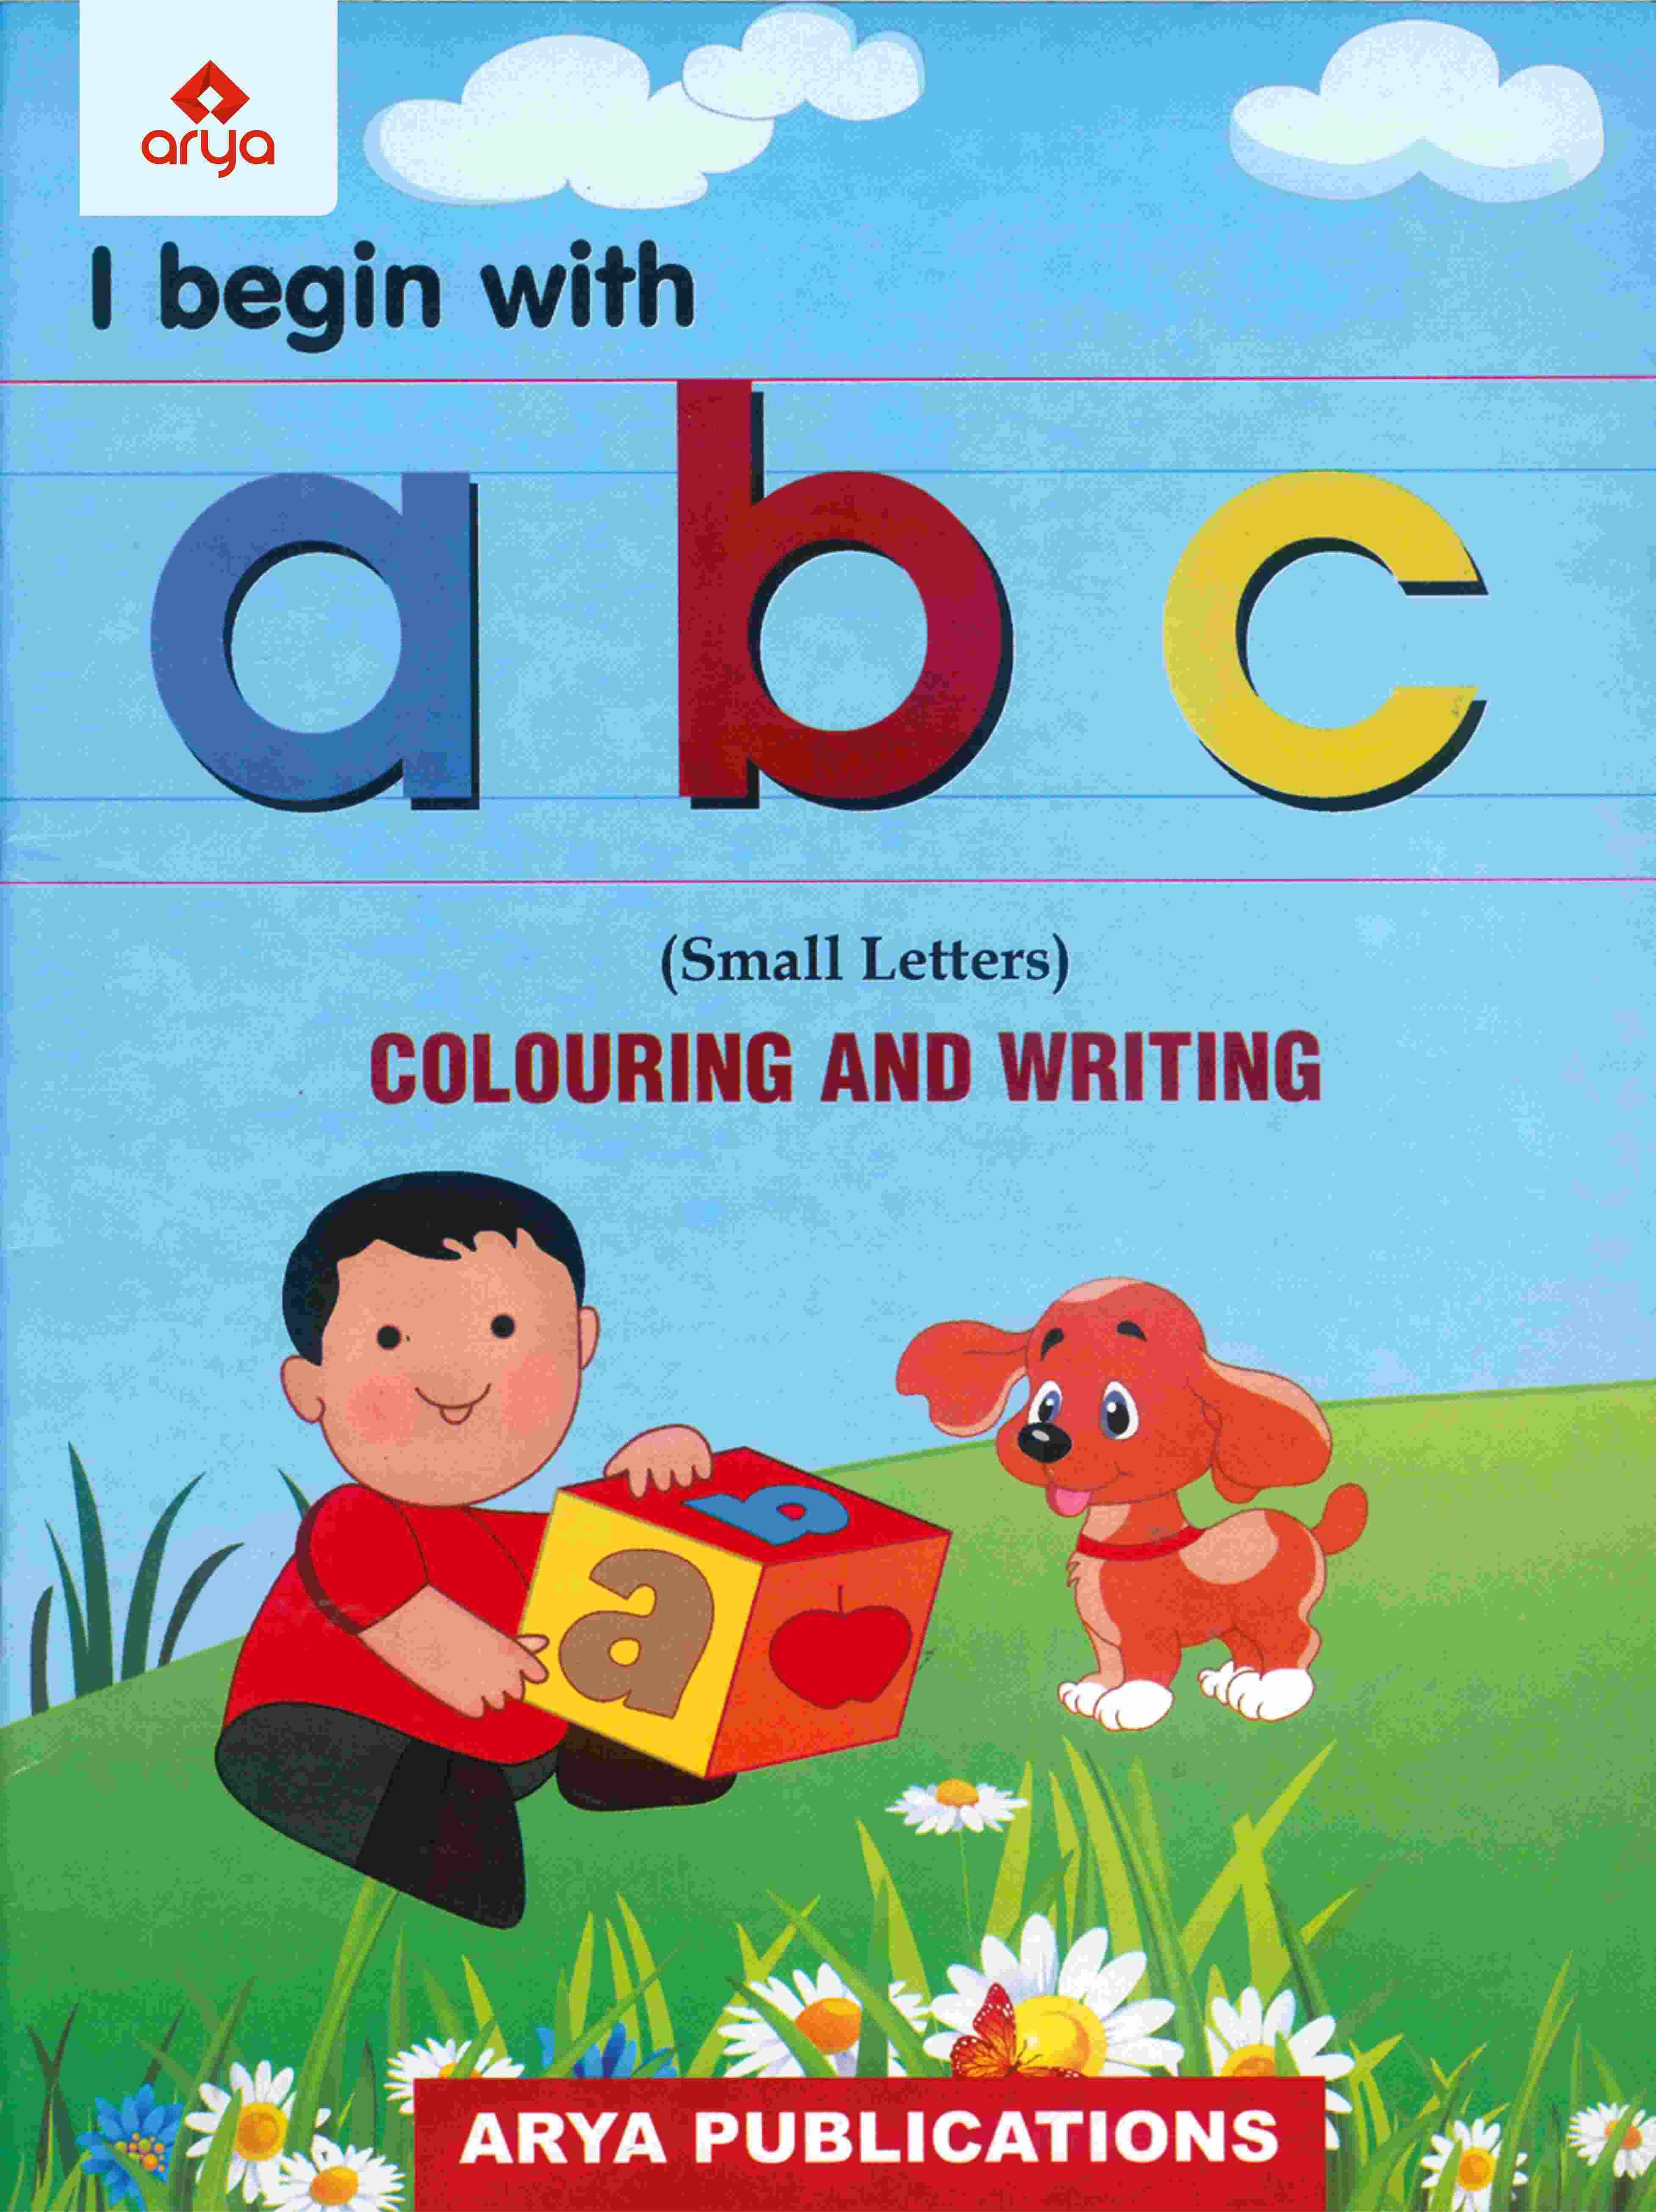 abc (Small Letters) Colouring and Writing